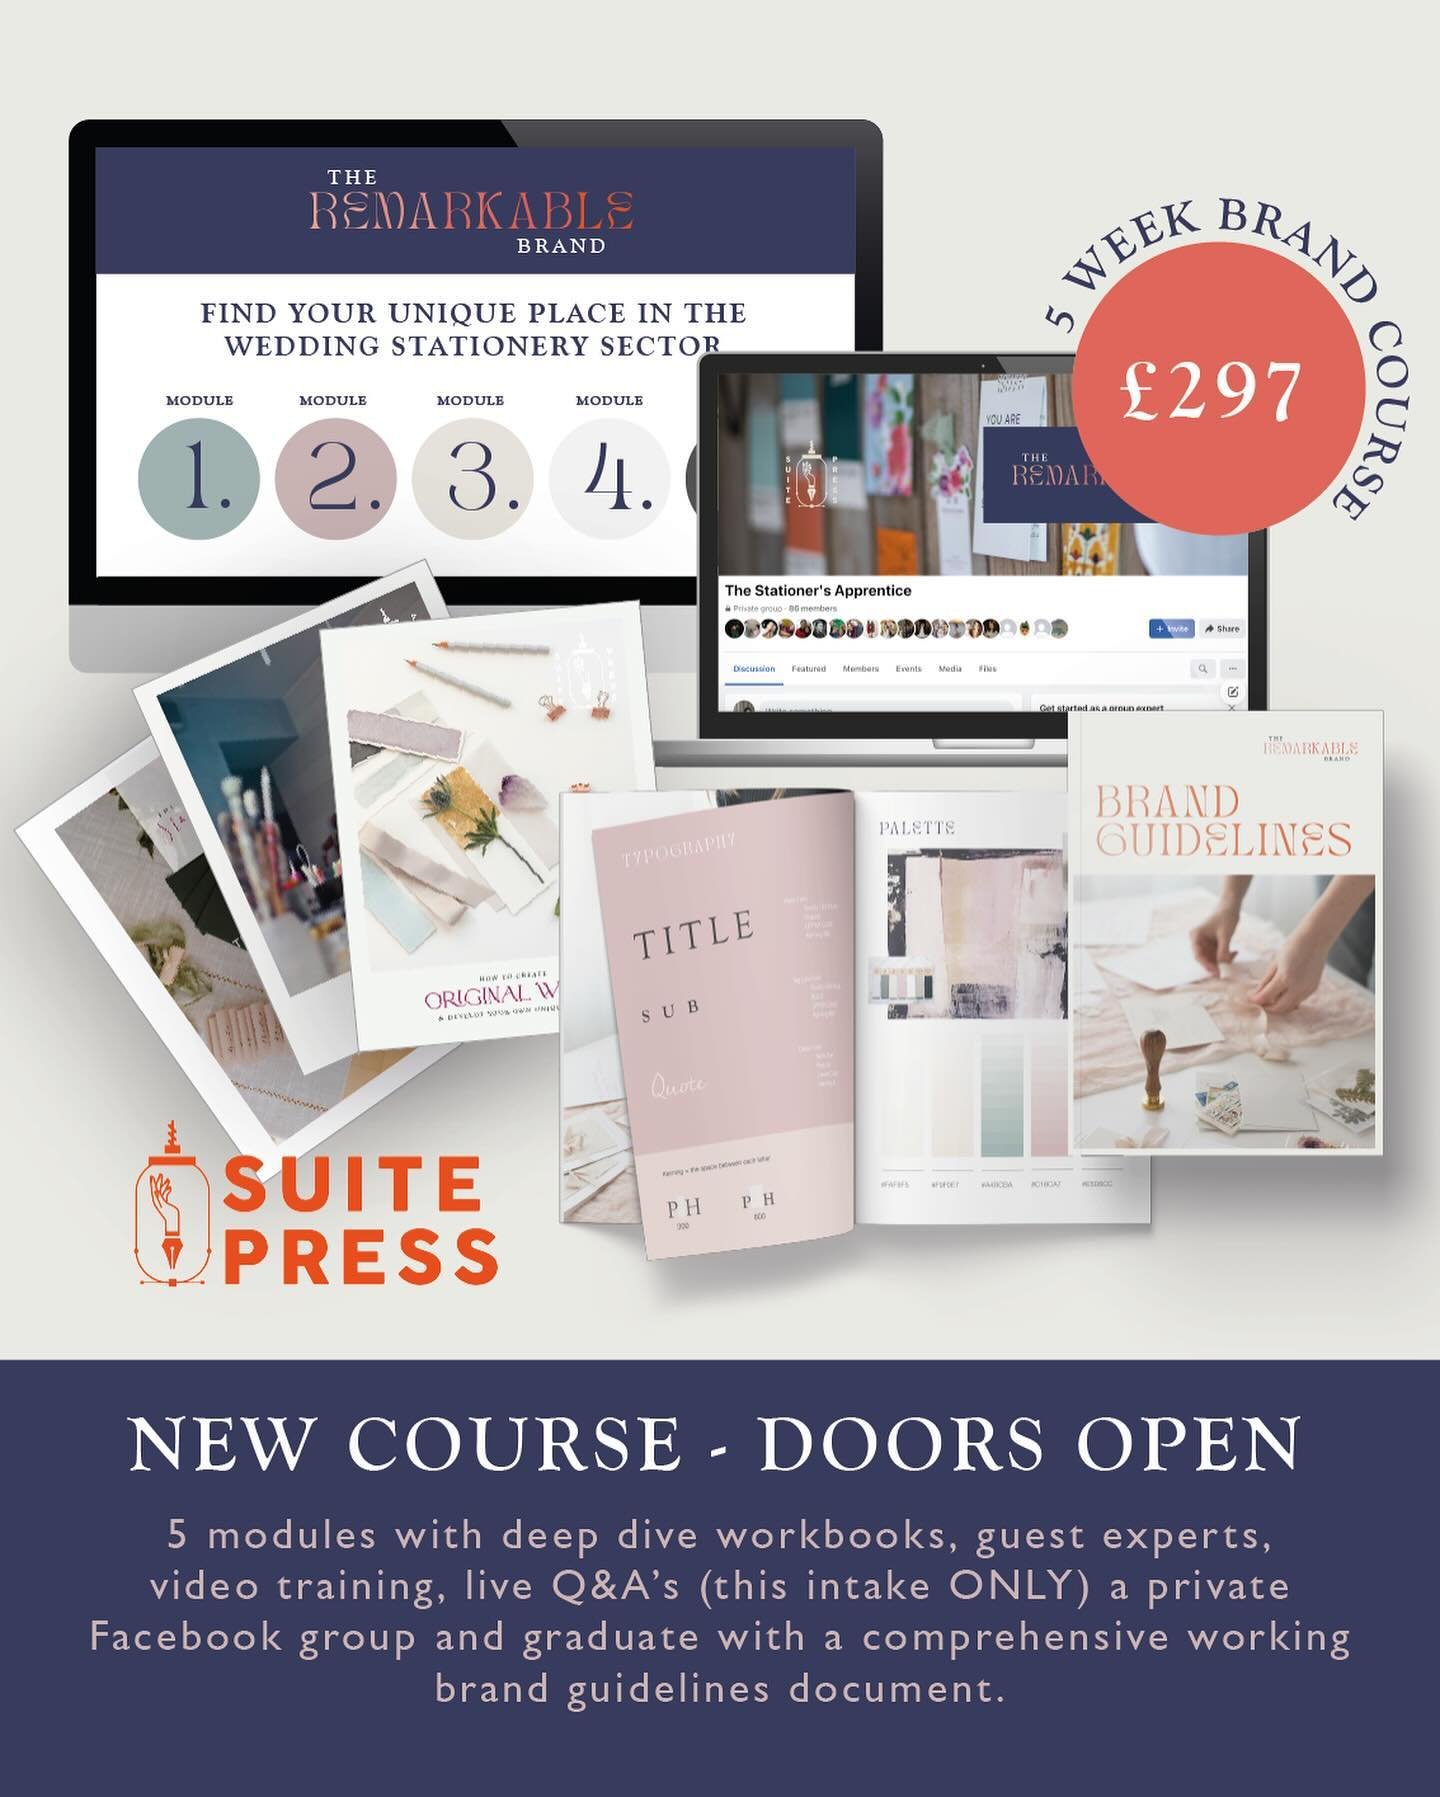 DOORS ARE OPEN! We are THRILLED to announce the latest course to the Suite Press portfolio, and one which is so creatively driven. We are going to have SO MUCH FUN!

&lsquo;The Remarkable Brand&rsquo; is an incredible new immersive and creatively l